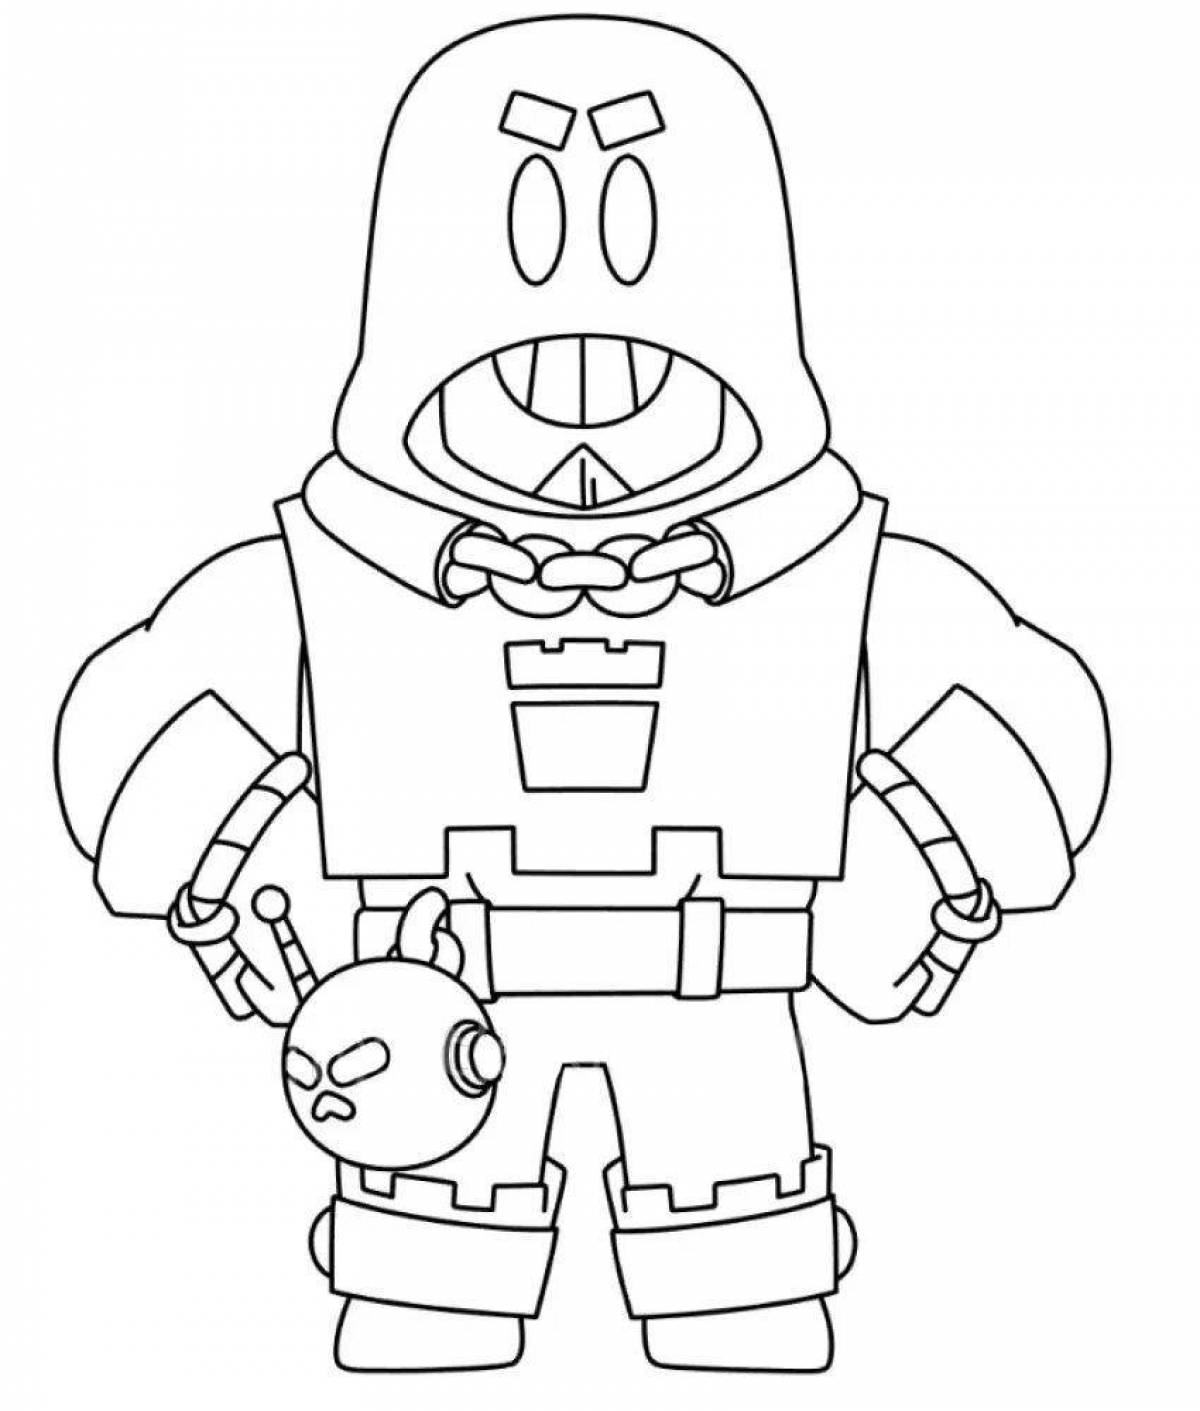 Blaver's twinkling stars coloring page